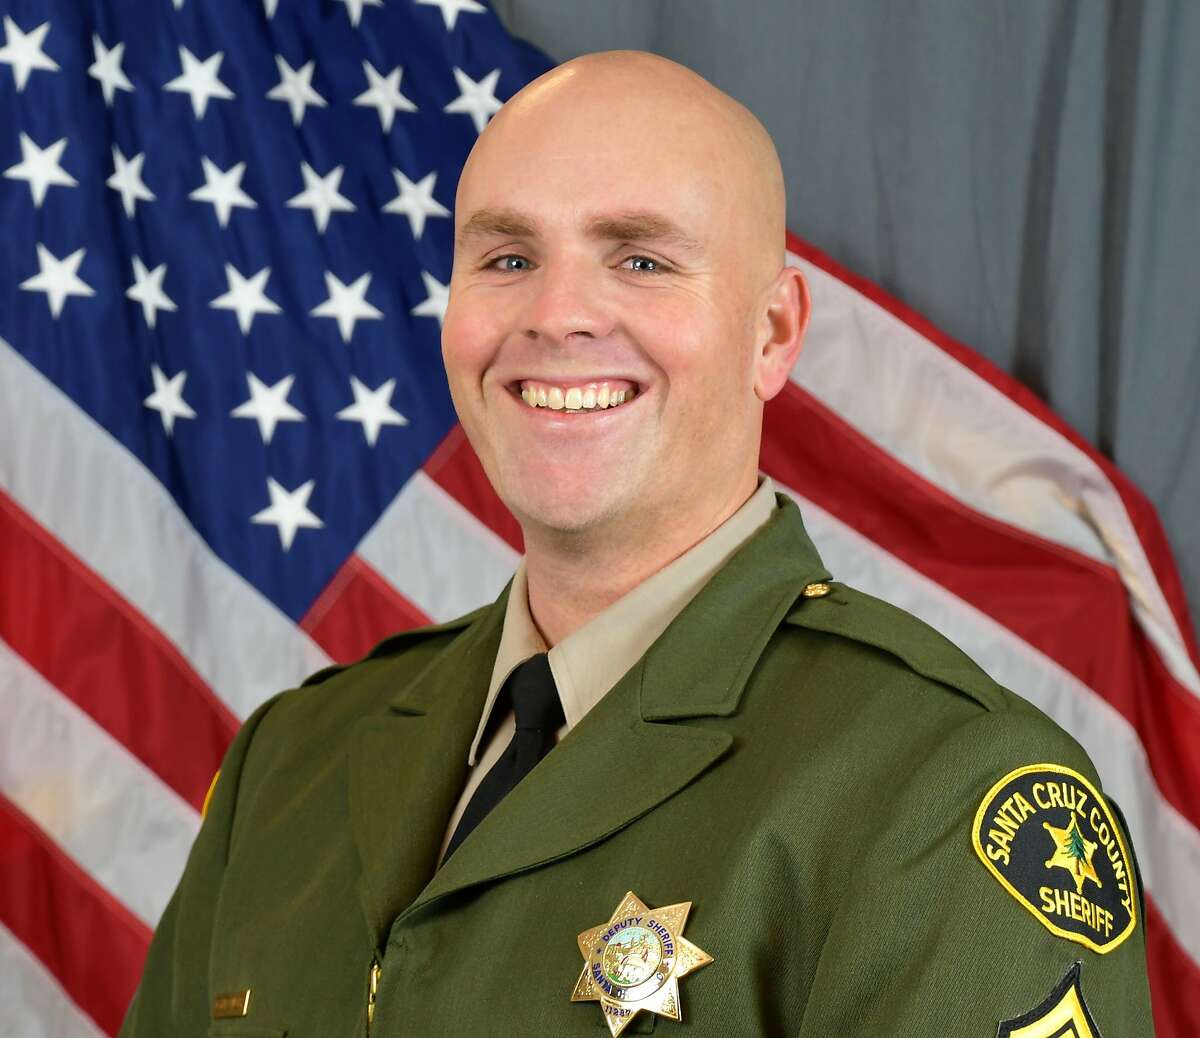 This photo provided by the Santa Cruz County Sheriff’s Office shows Sgt. Damon Gutzwiller. Gutzwiller was shot and killed Saturday, June 6, 2020, in Ben Lomond, an unincorporated area near Santa Cruz, Calif., when he and two other law enforcement officers were ambushed by a suspect. (Santa Cruz County Sheriff’s Office via AP)